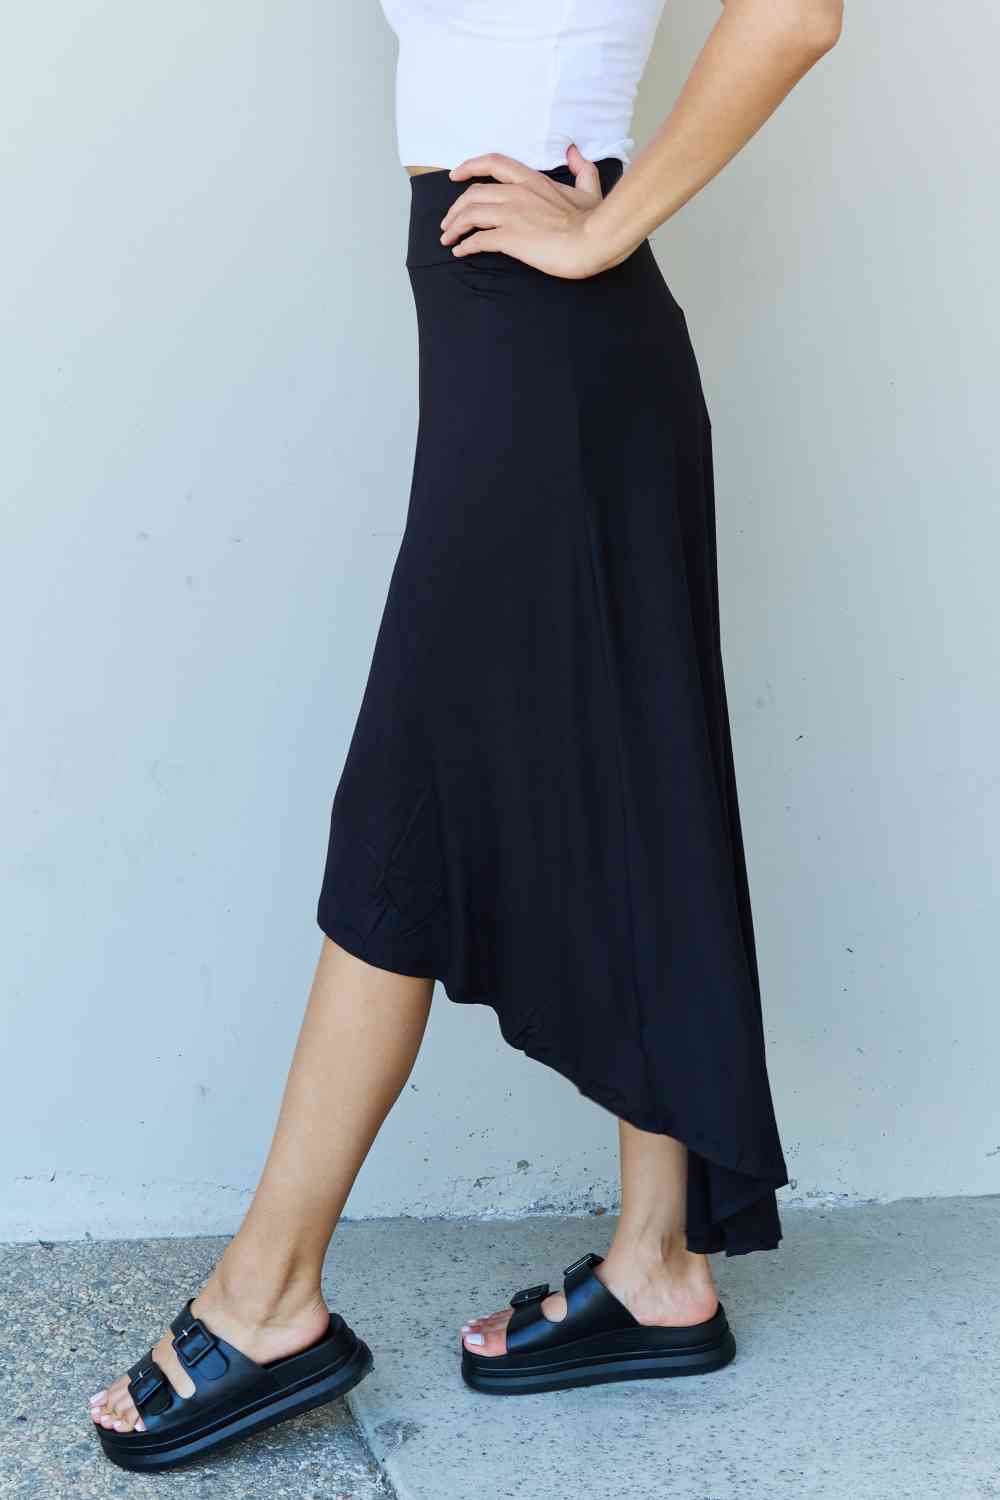 Ninexis First Choice High Waisted Flare Maxi Skirt in Black - TRENDMELO